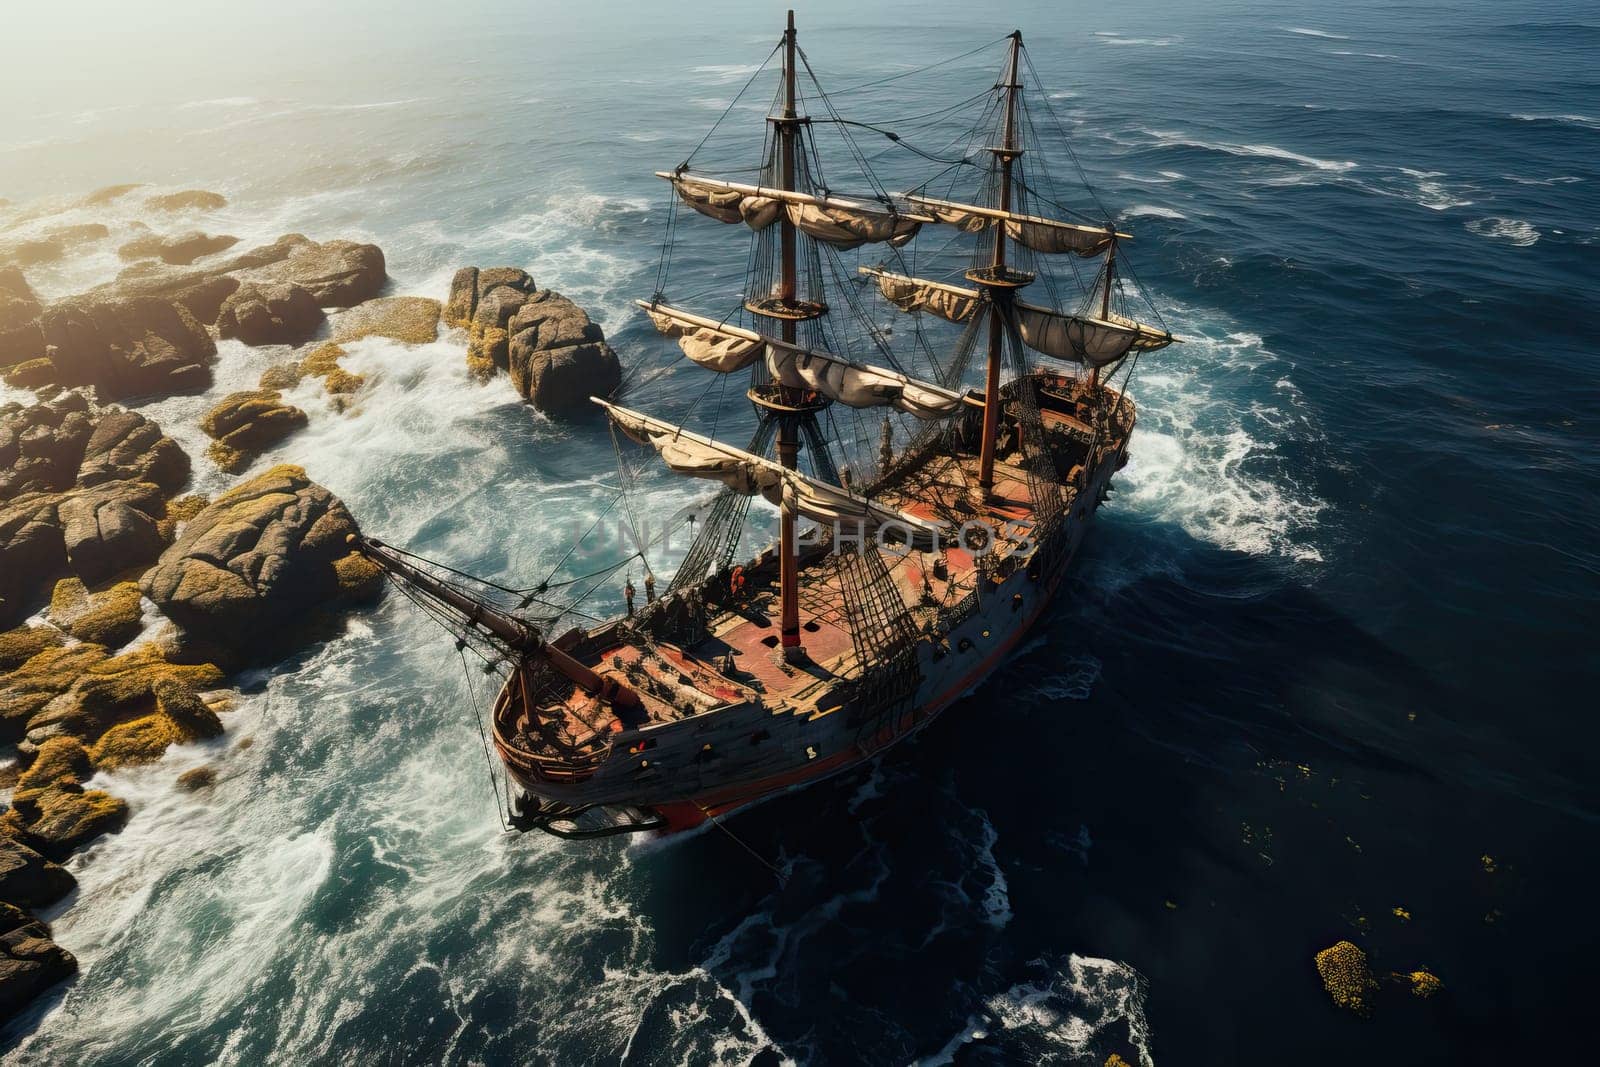 A large ship with sails, an old type of ship stands on the shoals of the sea near the beach, top view of the ship. Pirate ship sailing on the ocean. by Niko_Cingaryuk